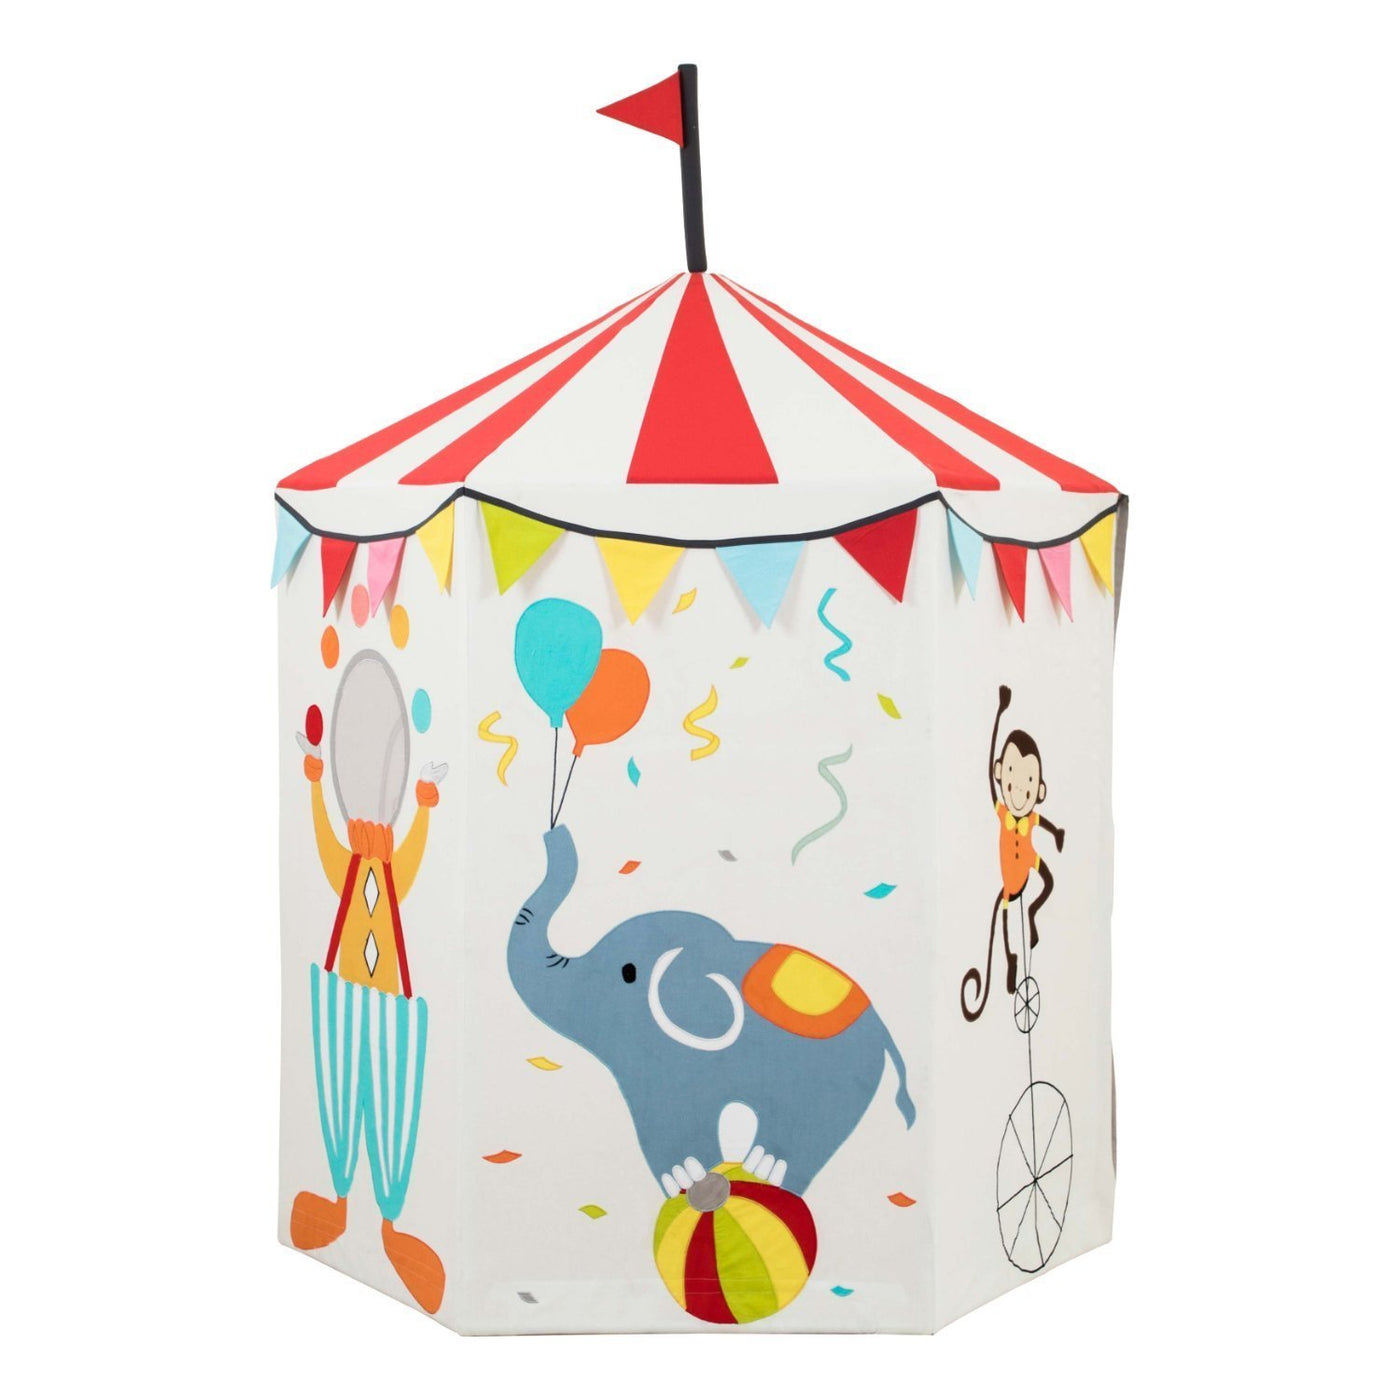 Deluxe Circus Playhouse Tent | Role Play